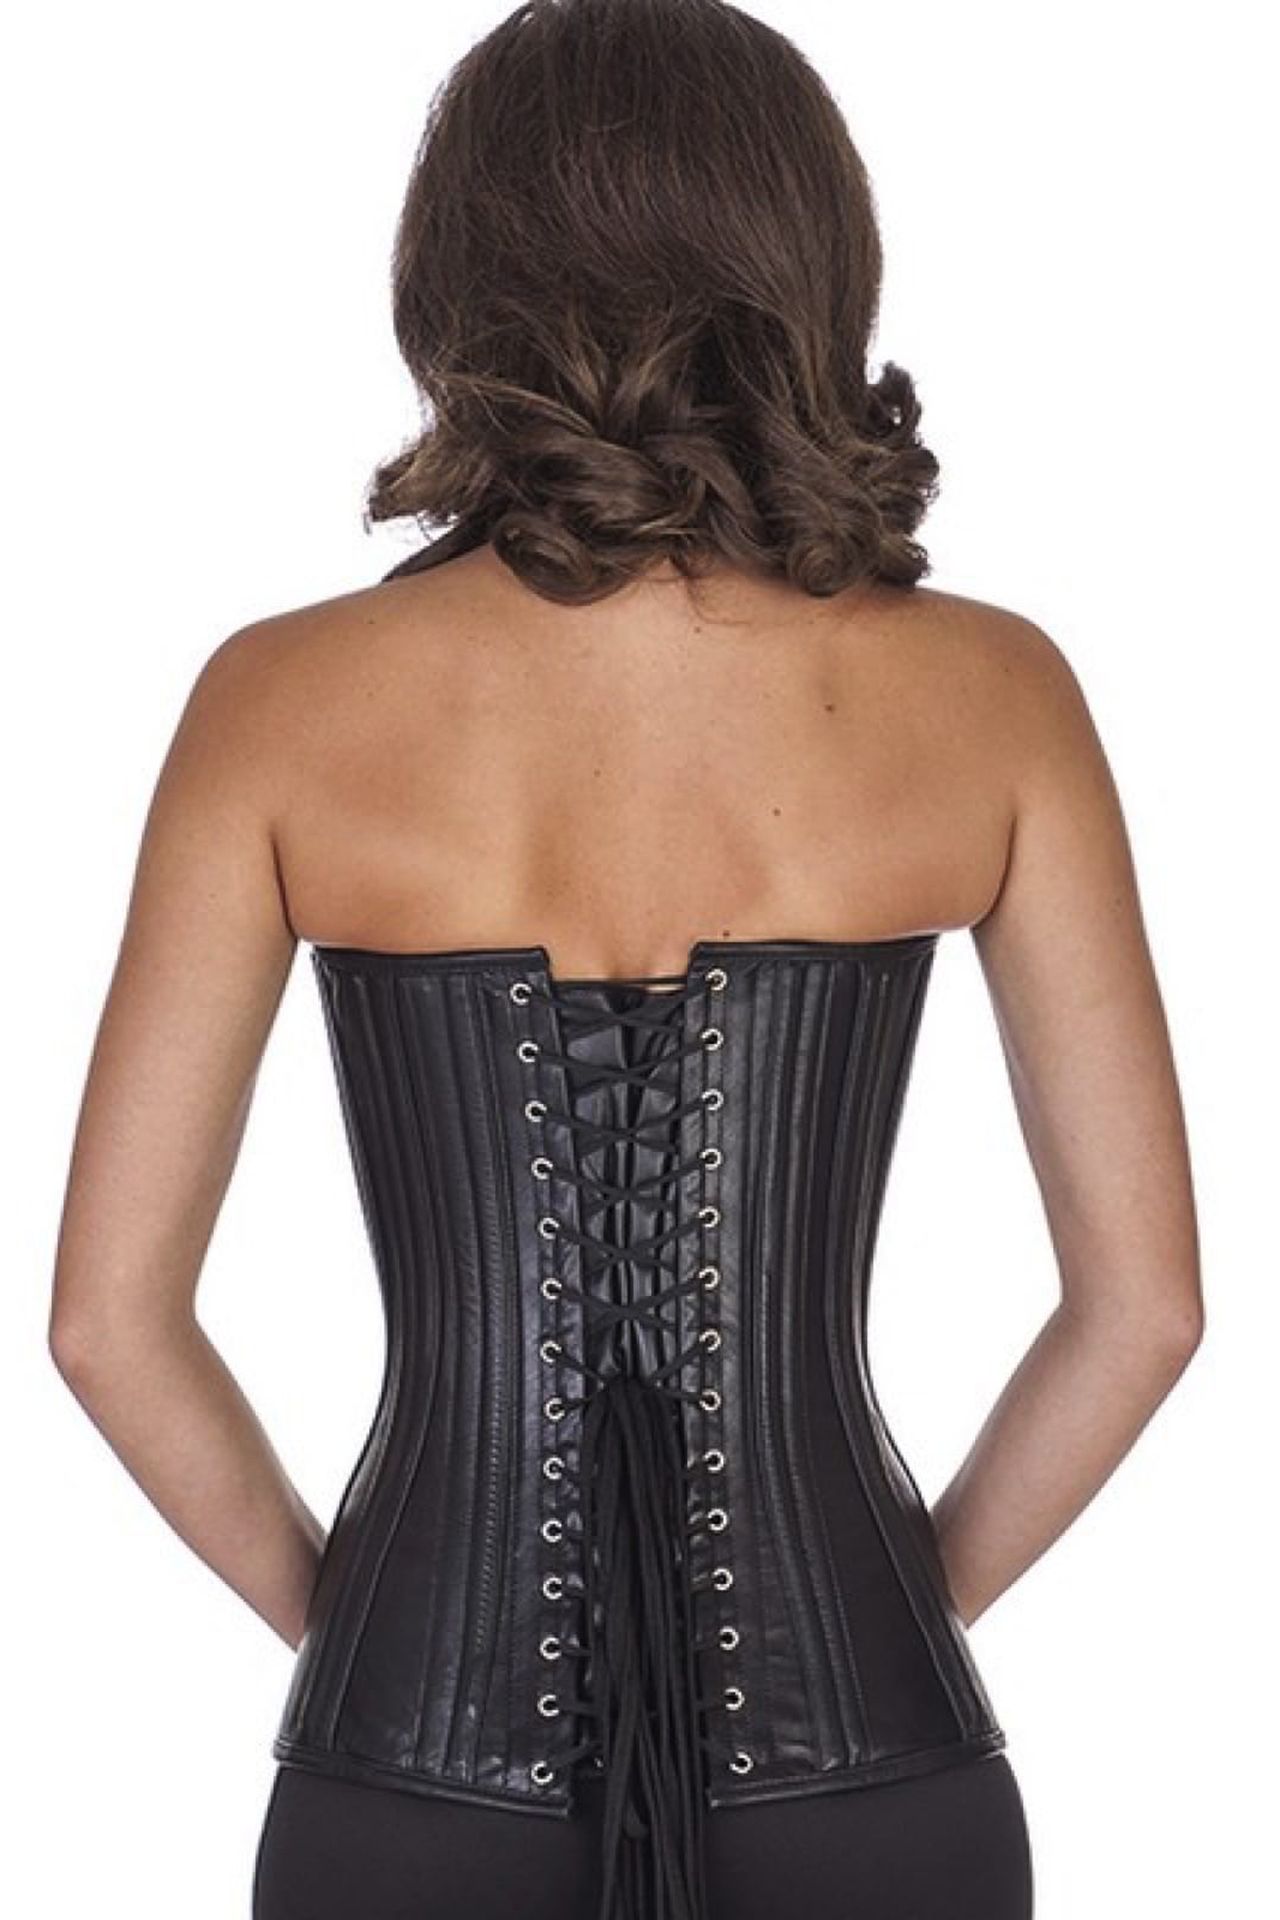 Corset black leather overbust plunge corset ll20